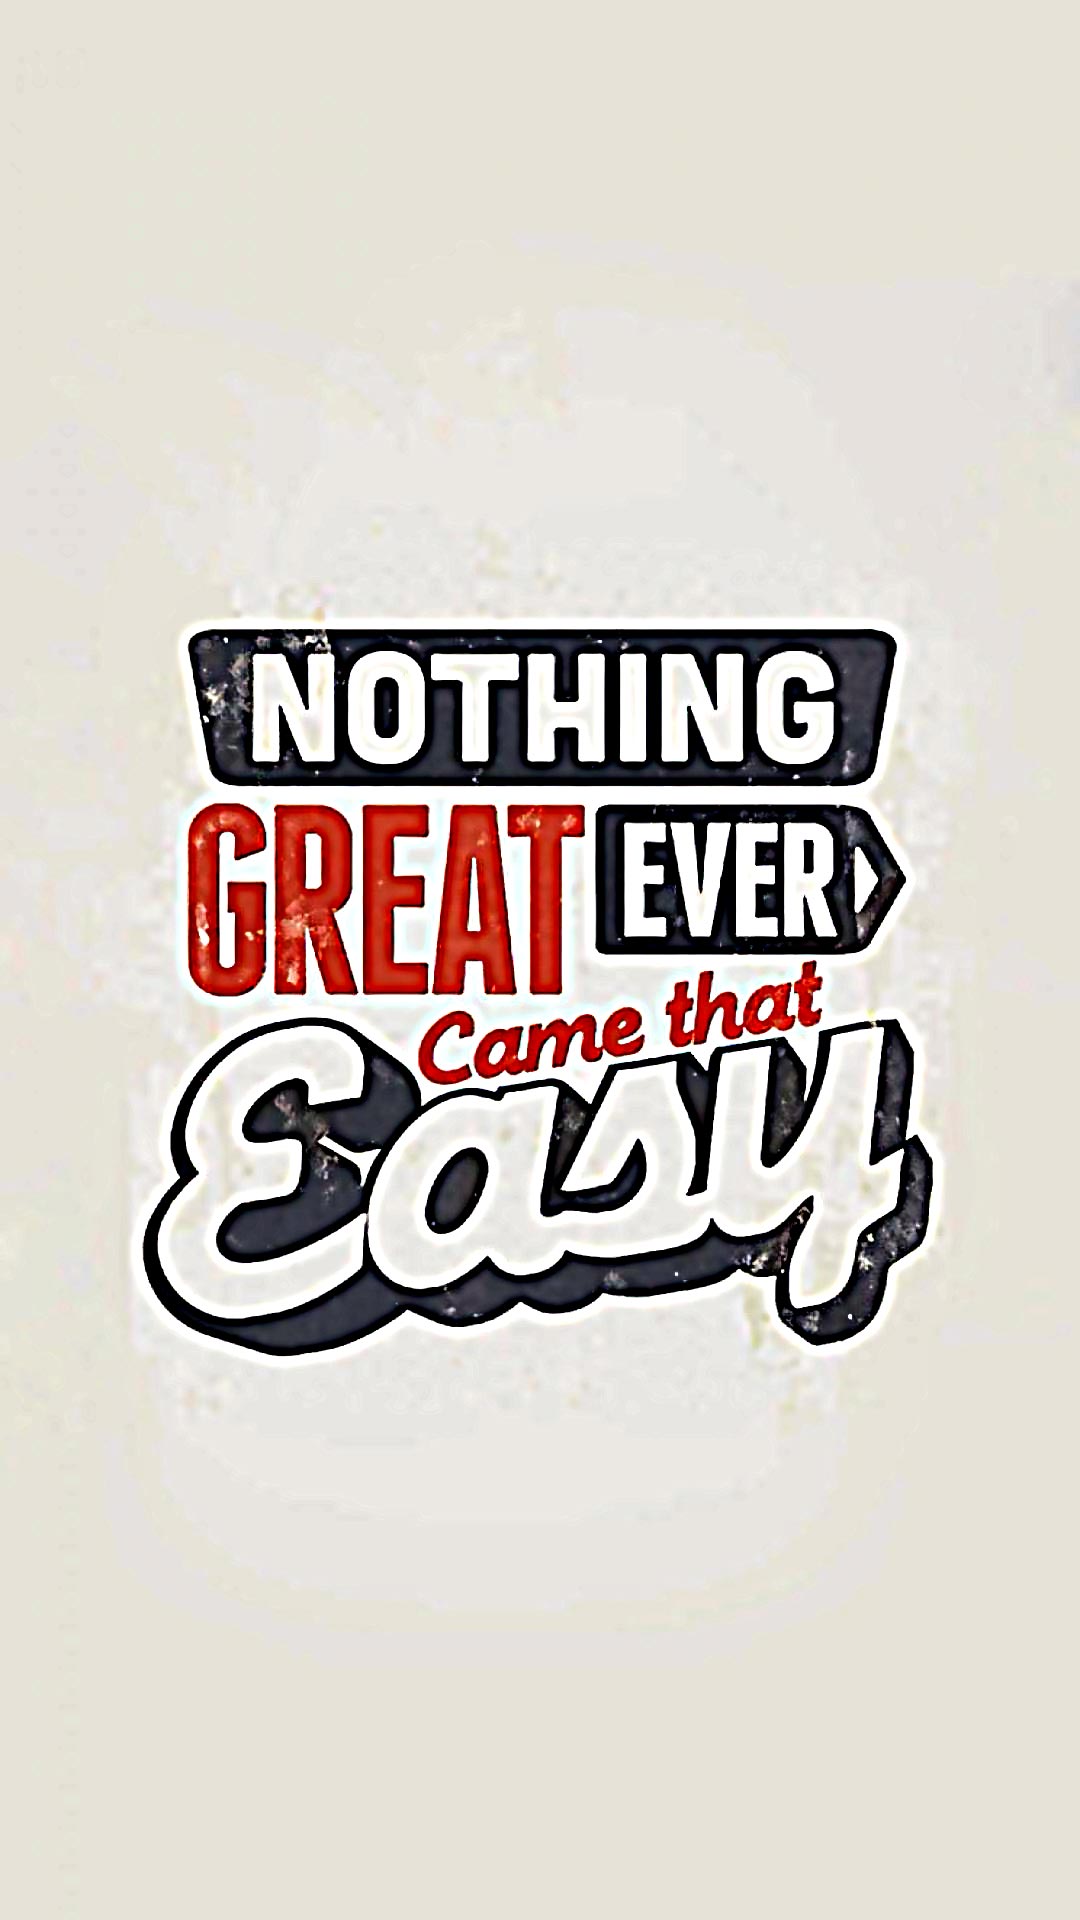 Nothing Great Ever Came That Easy かっこいいタイポグラフィ Iphone Wallpapers